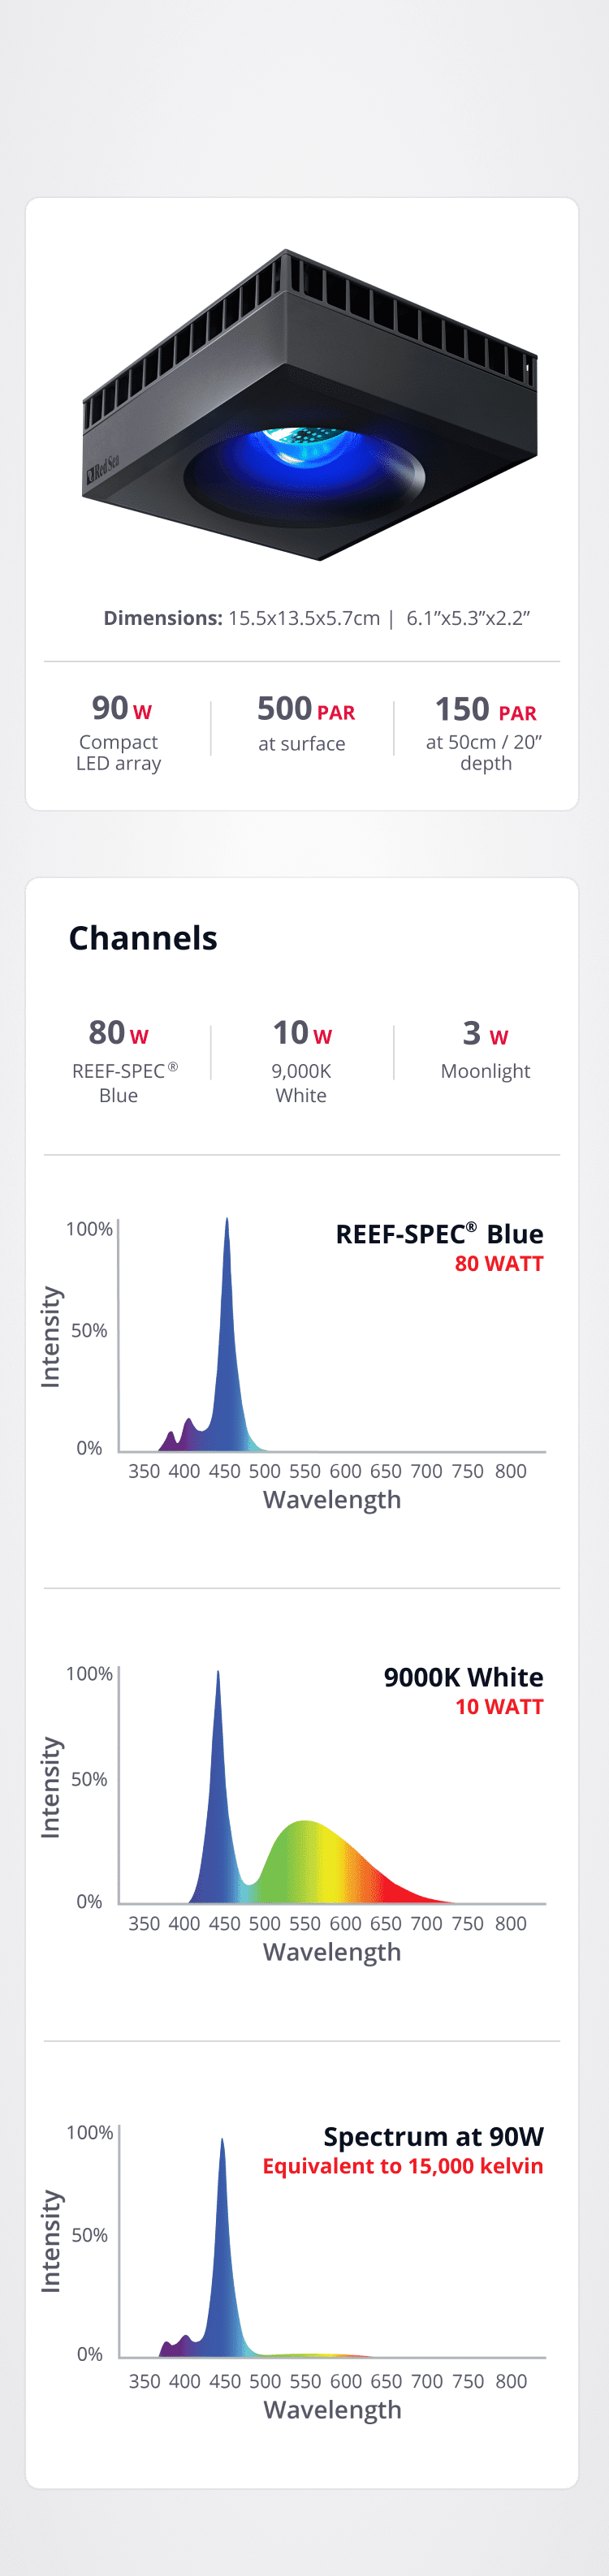 ReefLED - smart, safe, efficient reef lighting - Fully utilized by